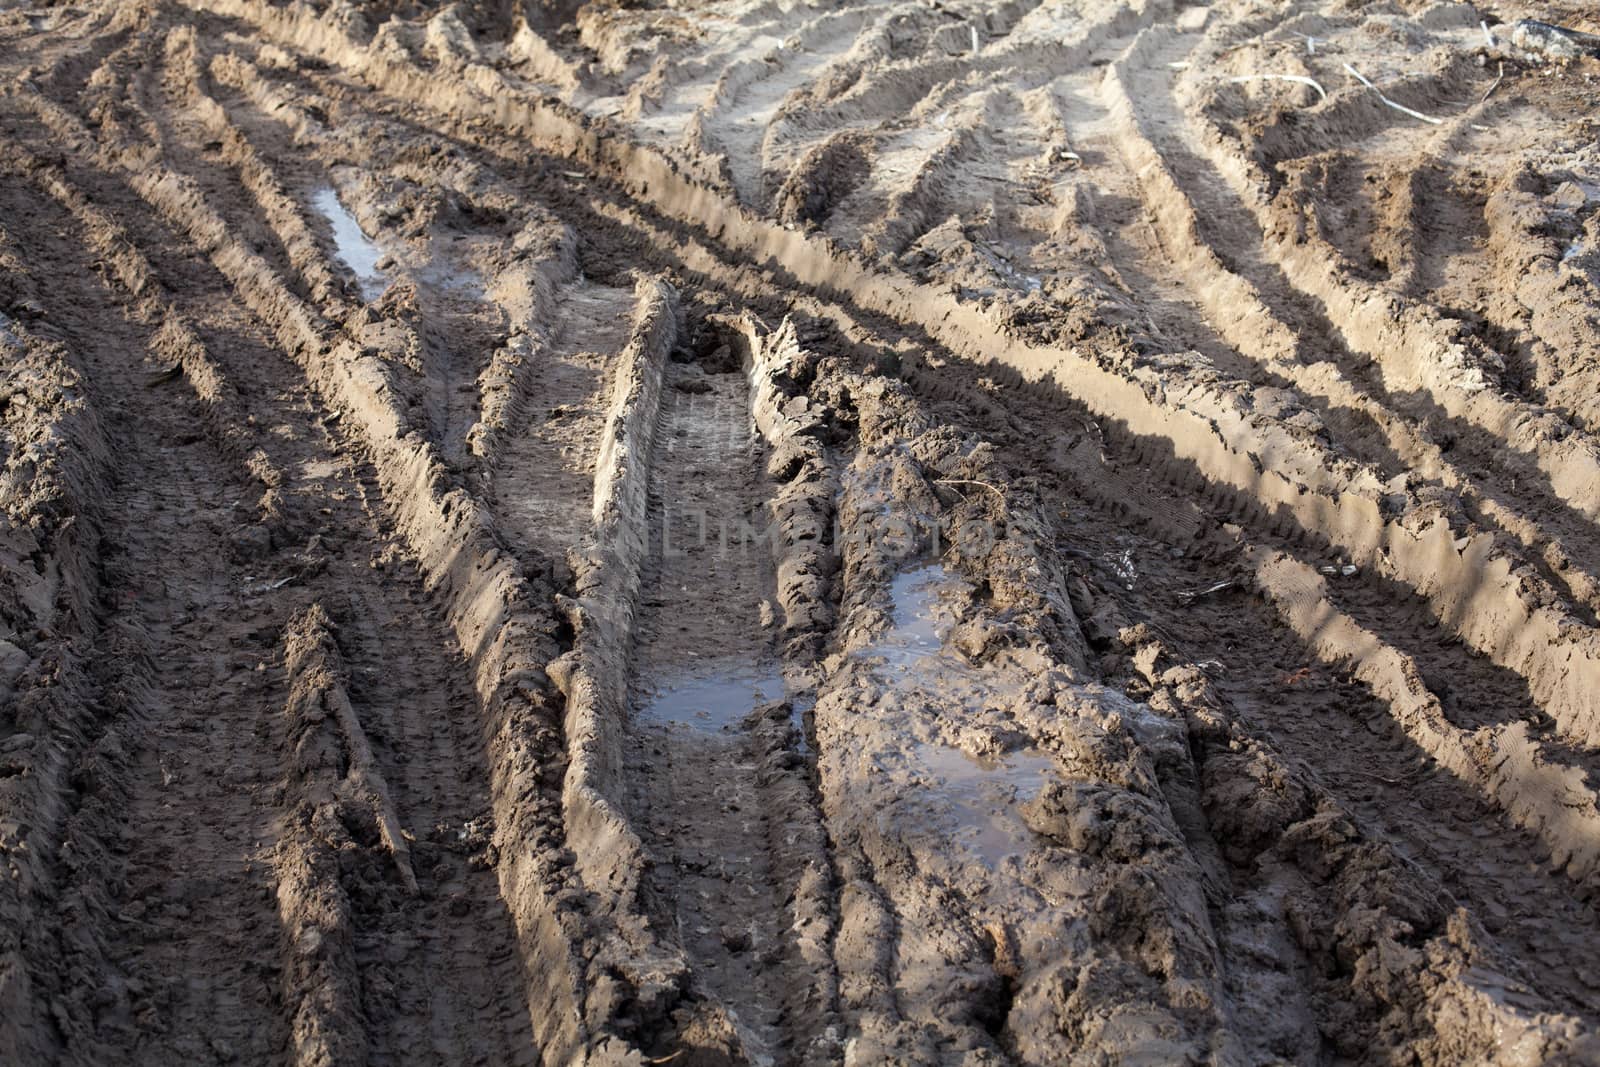 Wheel ruts on the muddy dirt road after the rain.